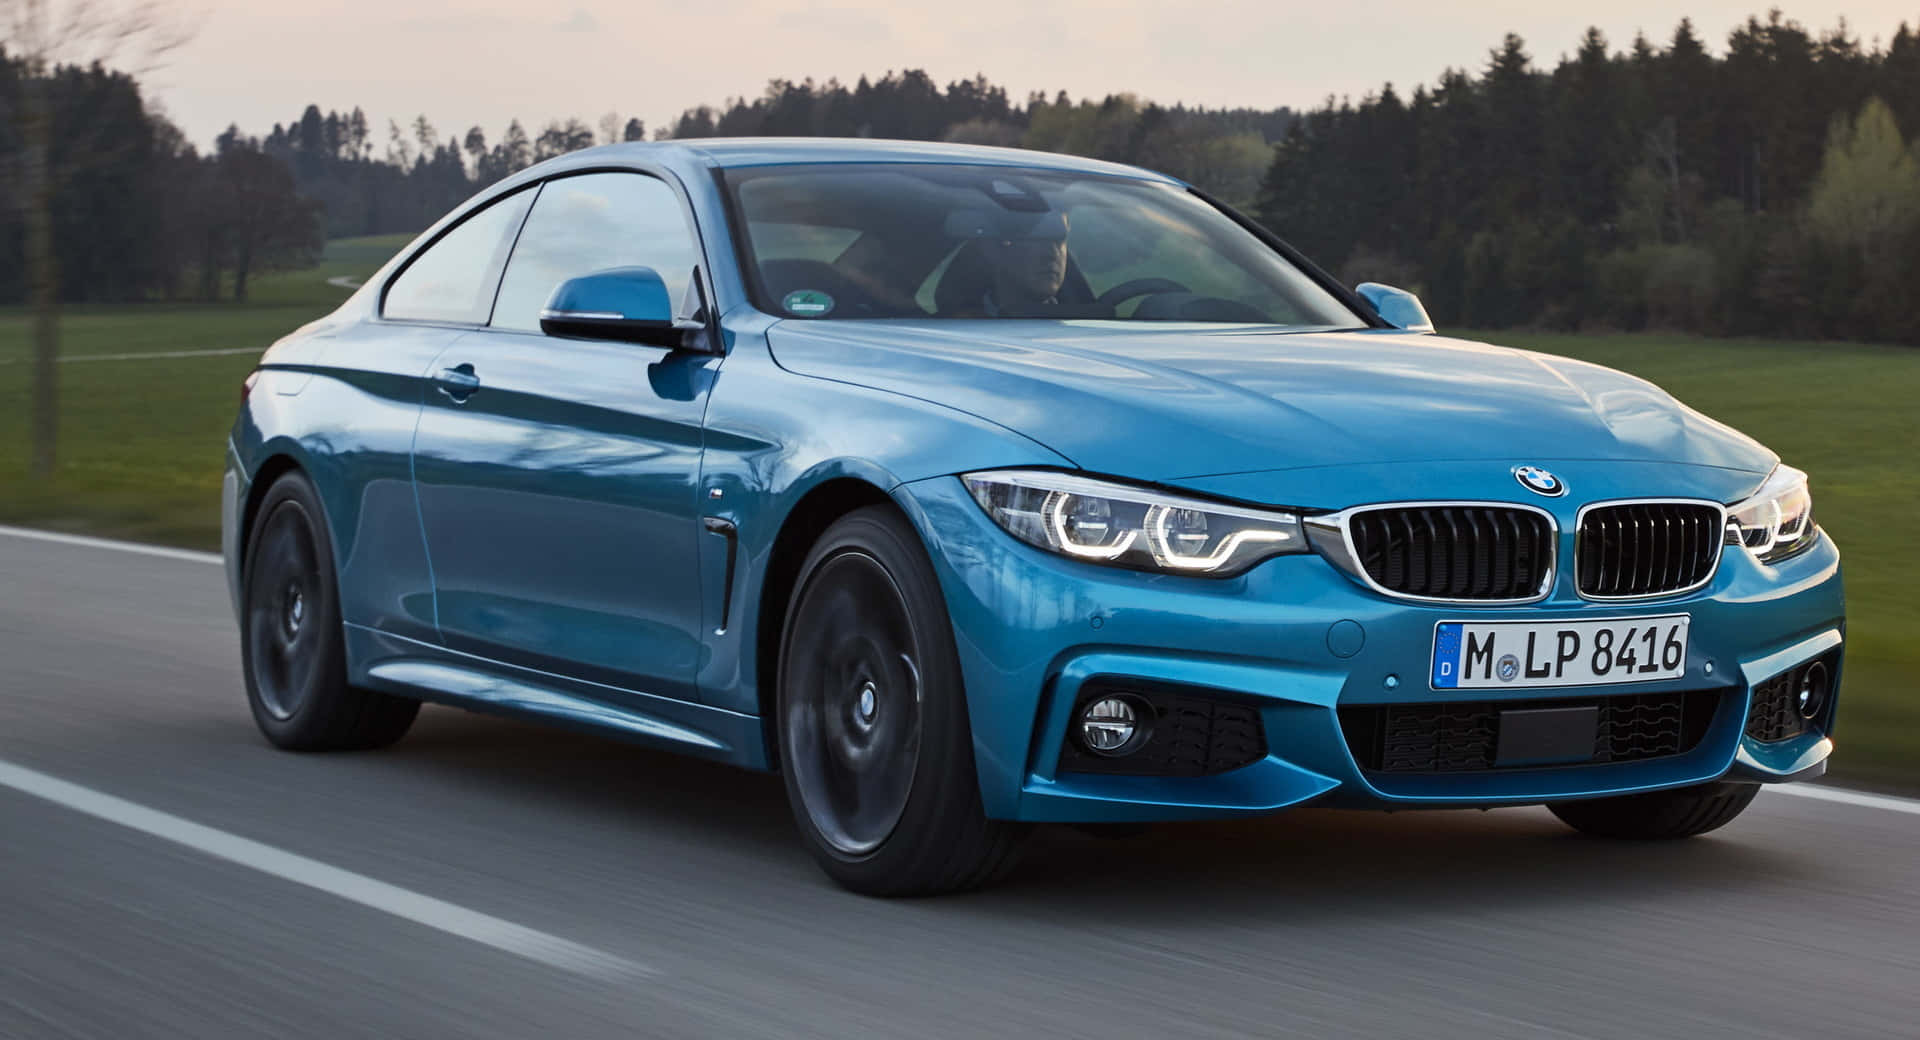 The BMW 440i, class and power in one luxury vehicle. Wallpaper